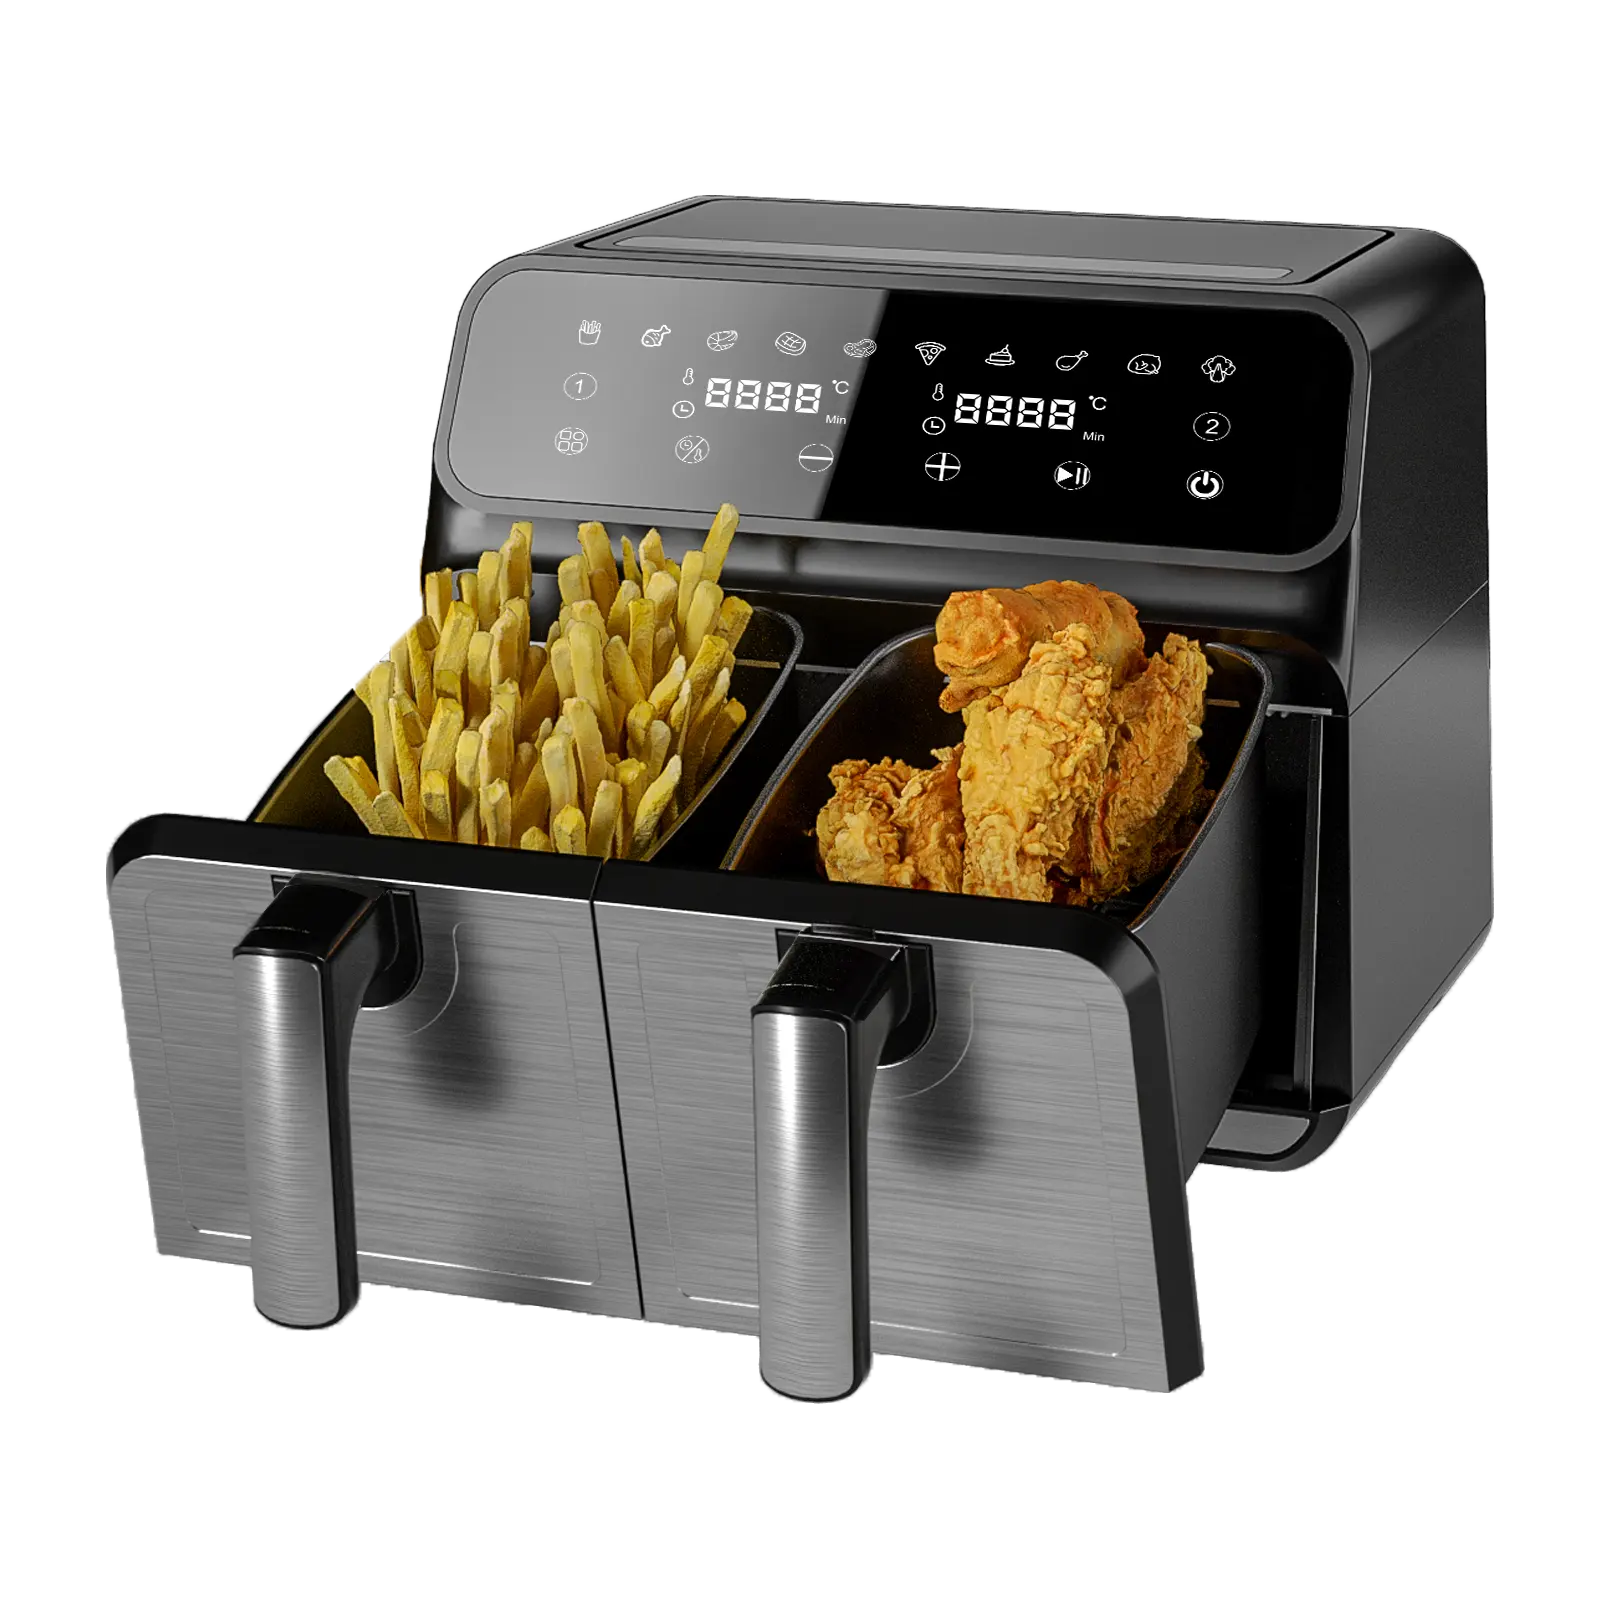 Oven Large with Touch Screen Detachable Dishwasher Safe Nonstick Basket XL 30lt electr air fryers double with timer